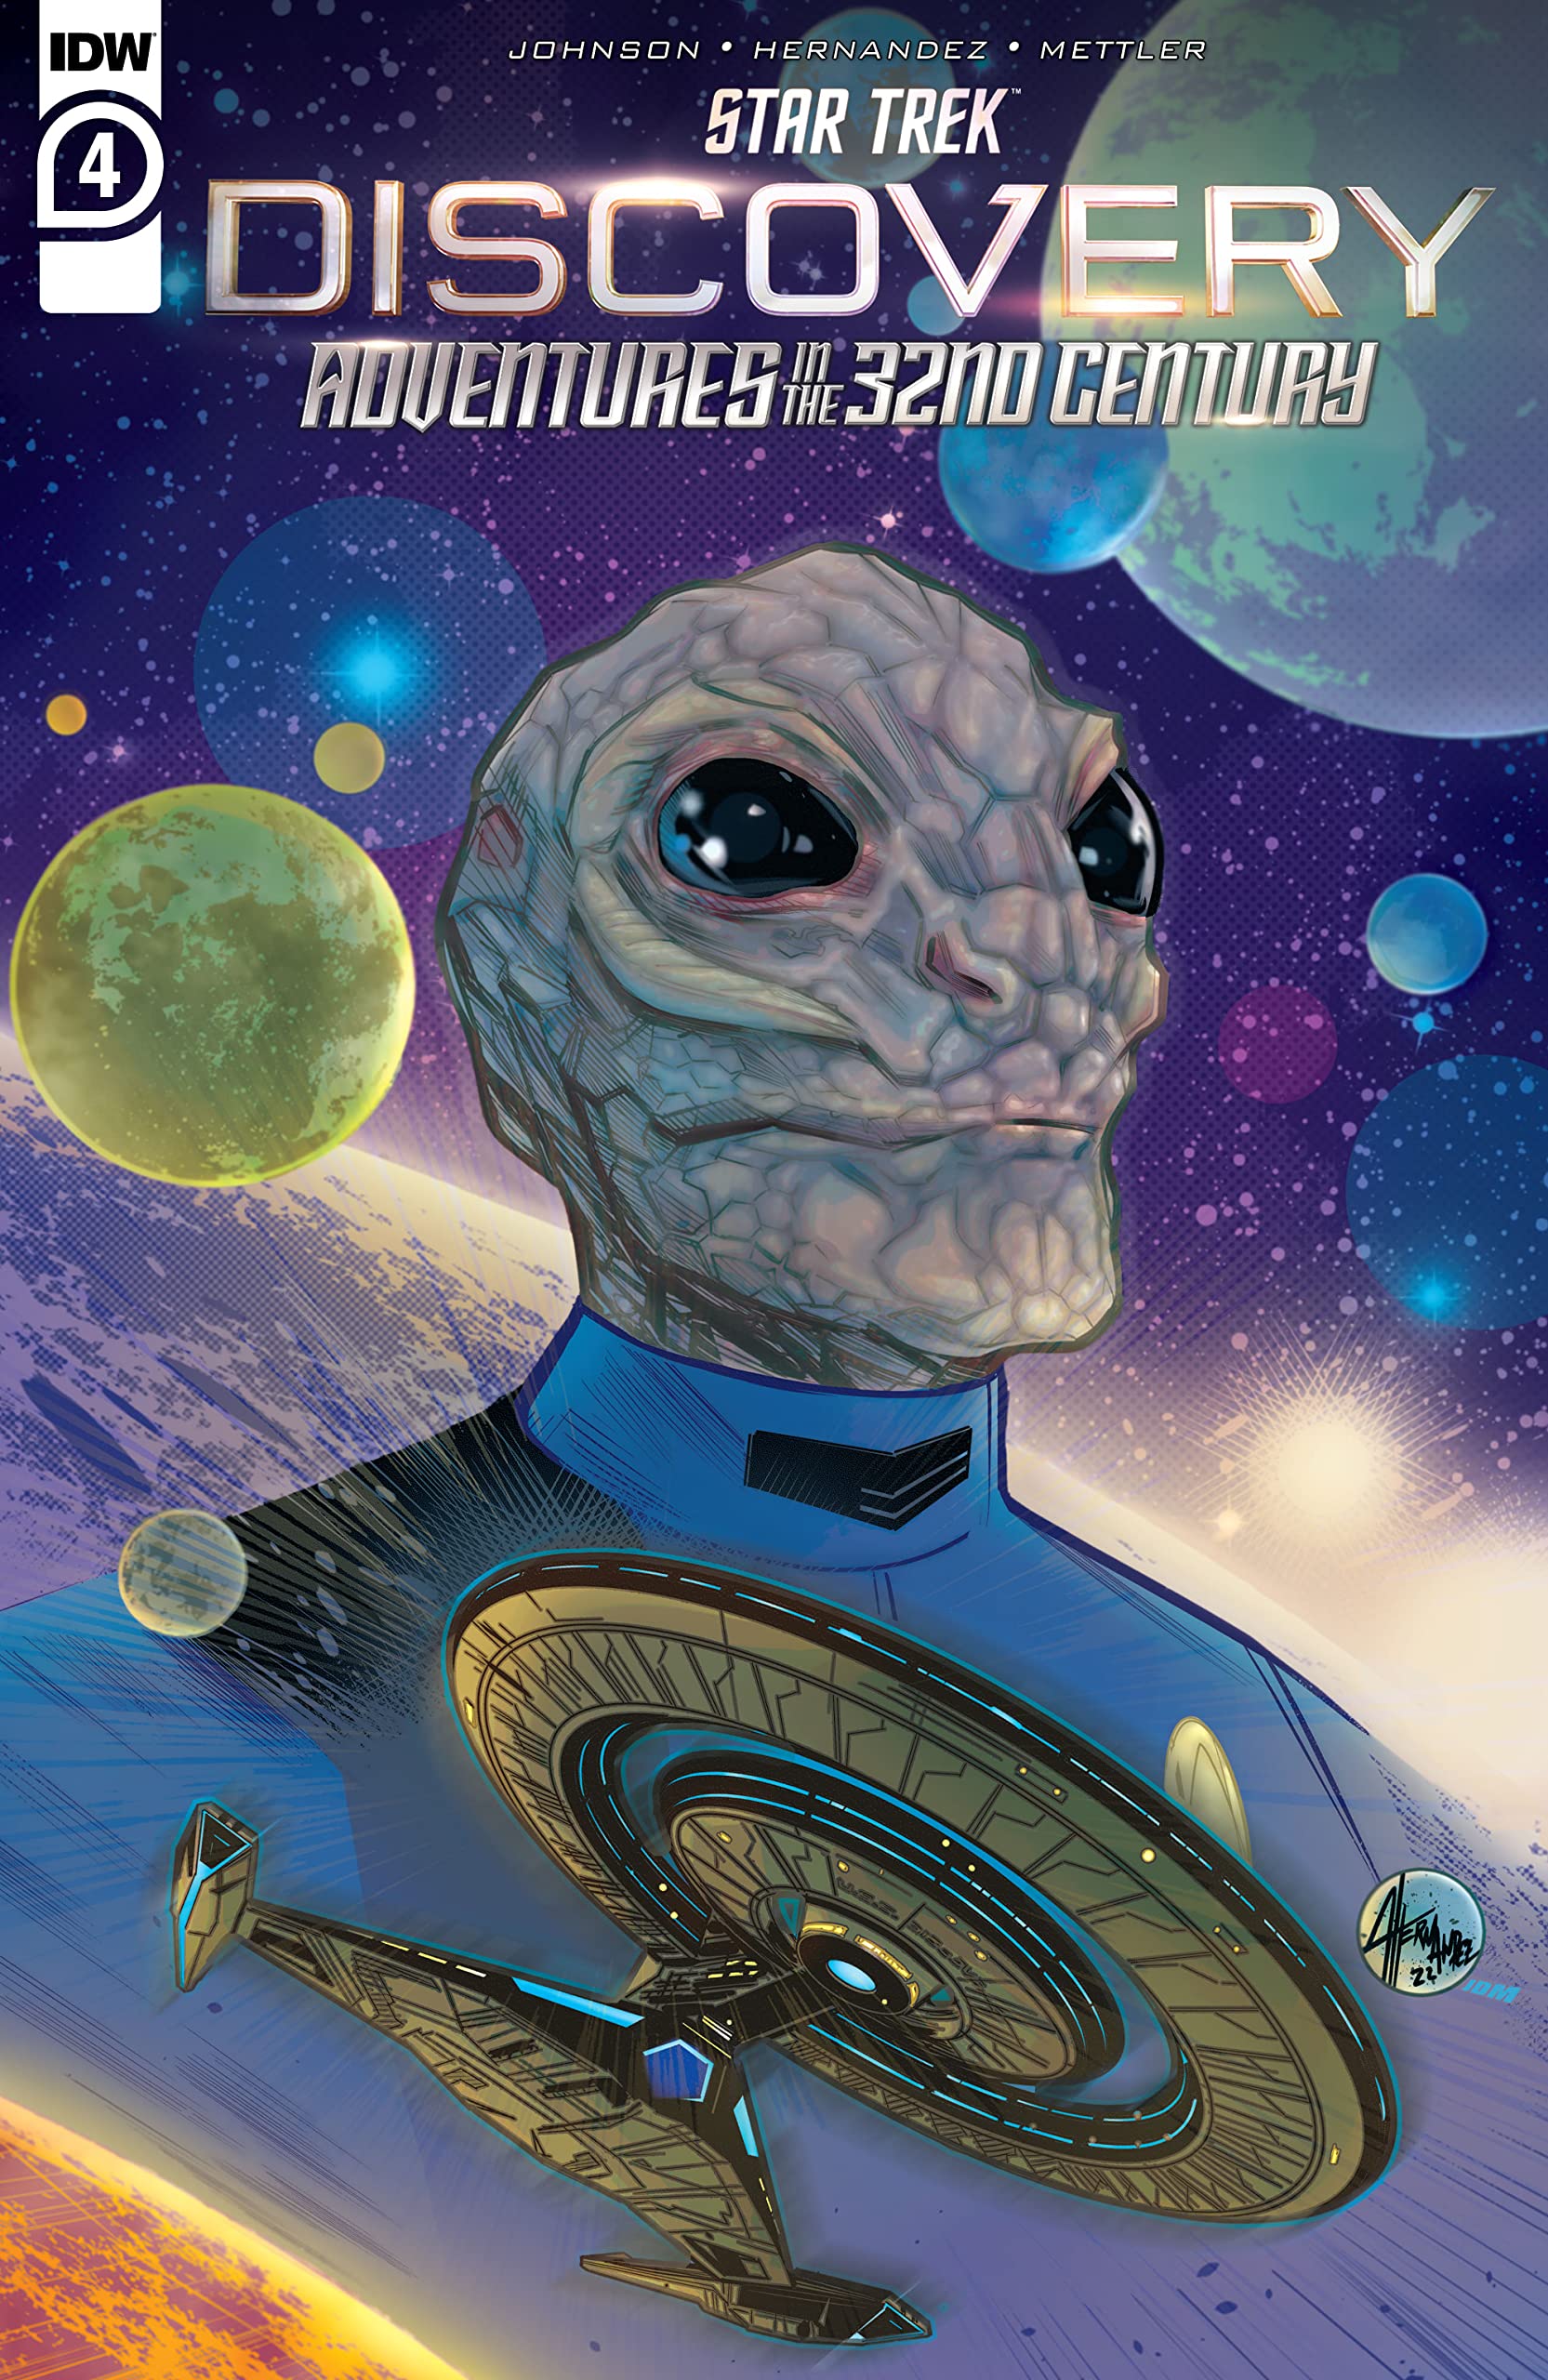 Star Trek: Discovery - Adventures in the 32nd Century #4 (EBook, 2022, IDW)